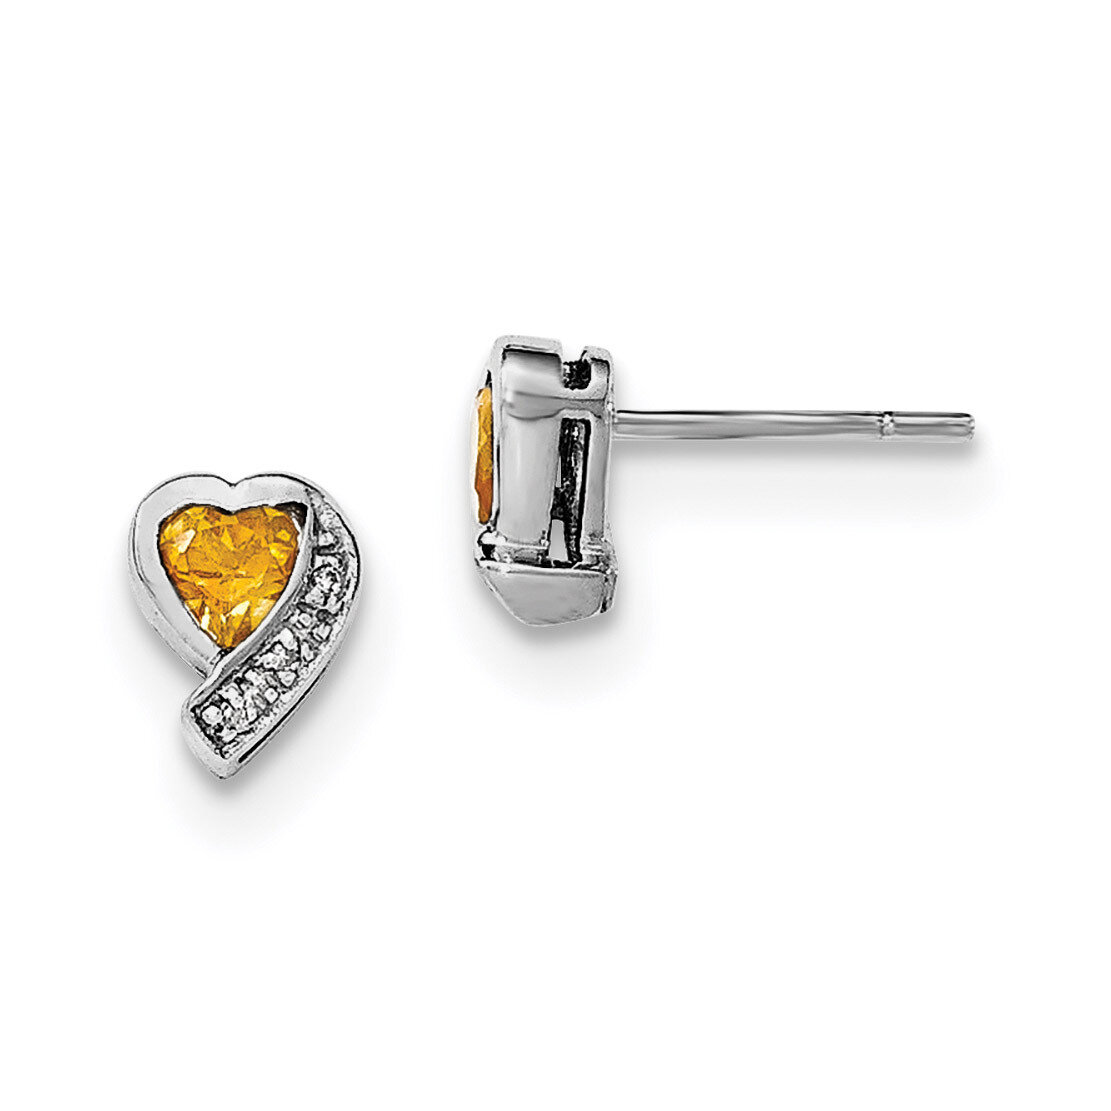 Citrine and Diamond Heart Earrings Sterling Silver Rhodium-plated QE12618CI